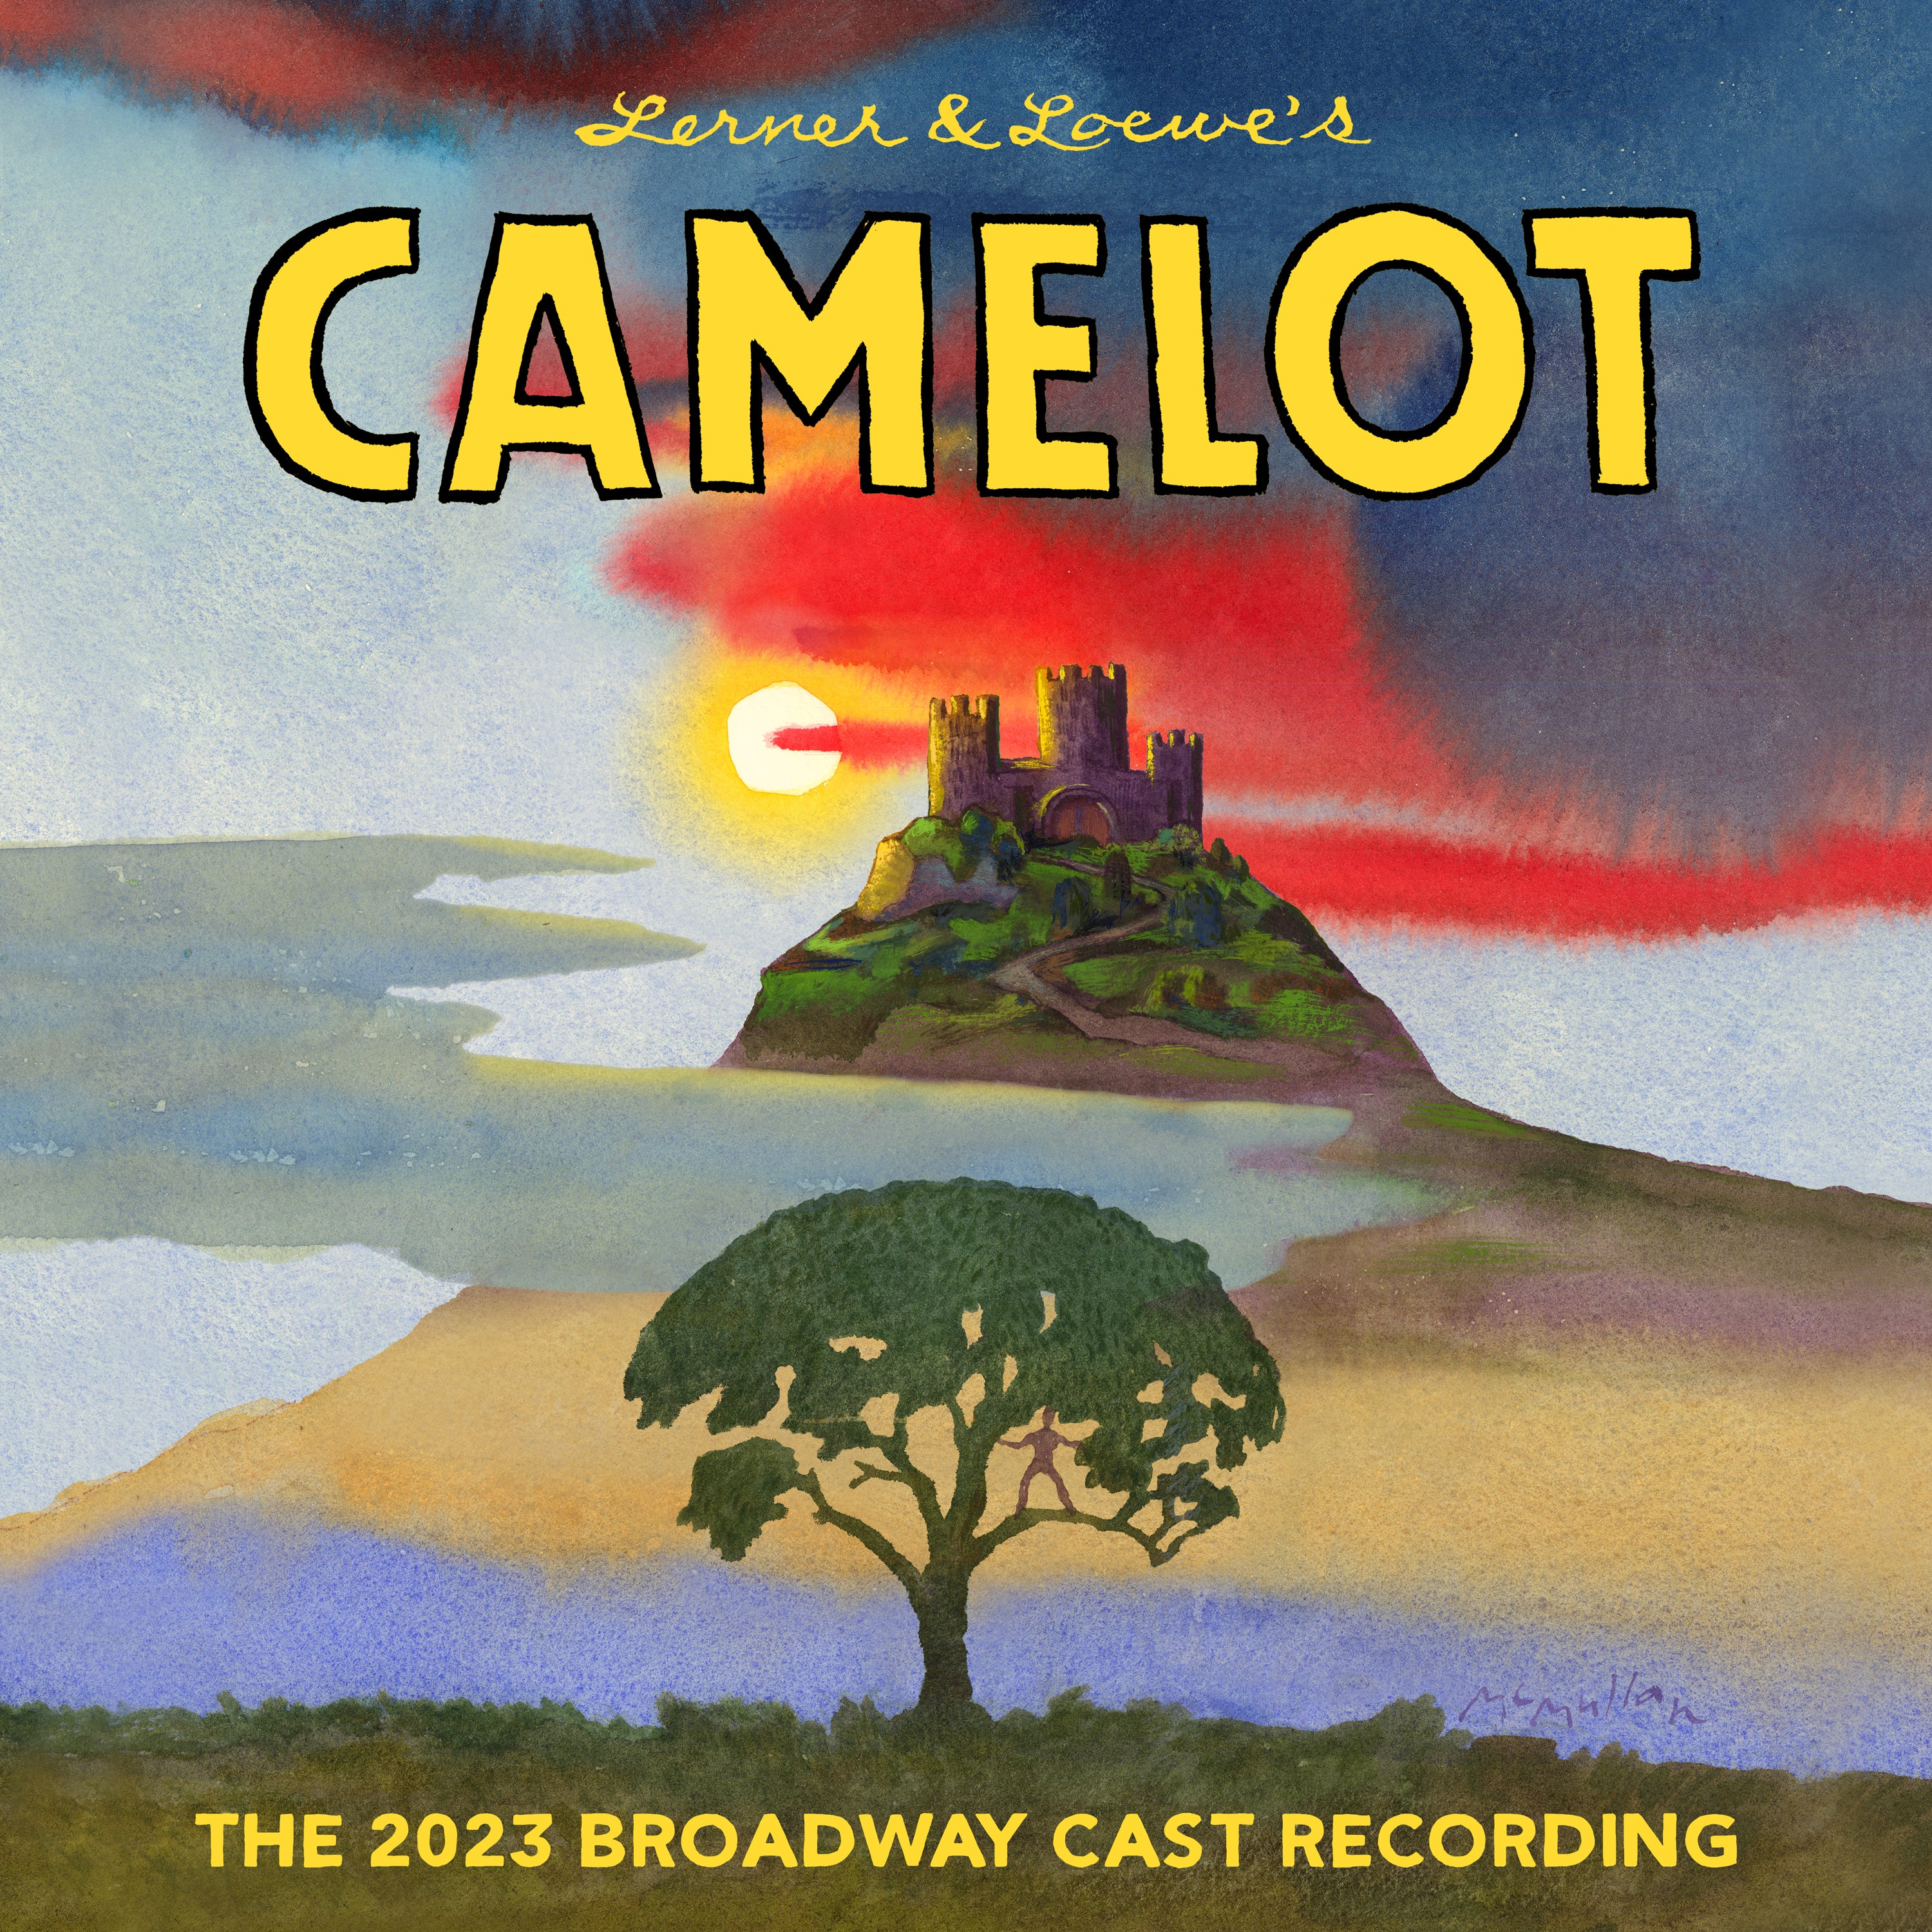 Camelot (The 2023 Broadway Cast Recording) [CD] Broadway Records